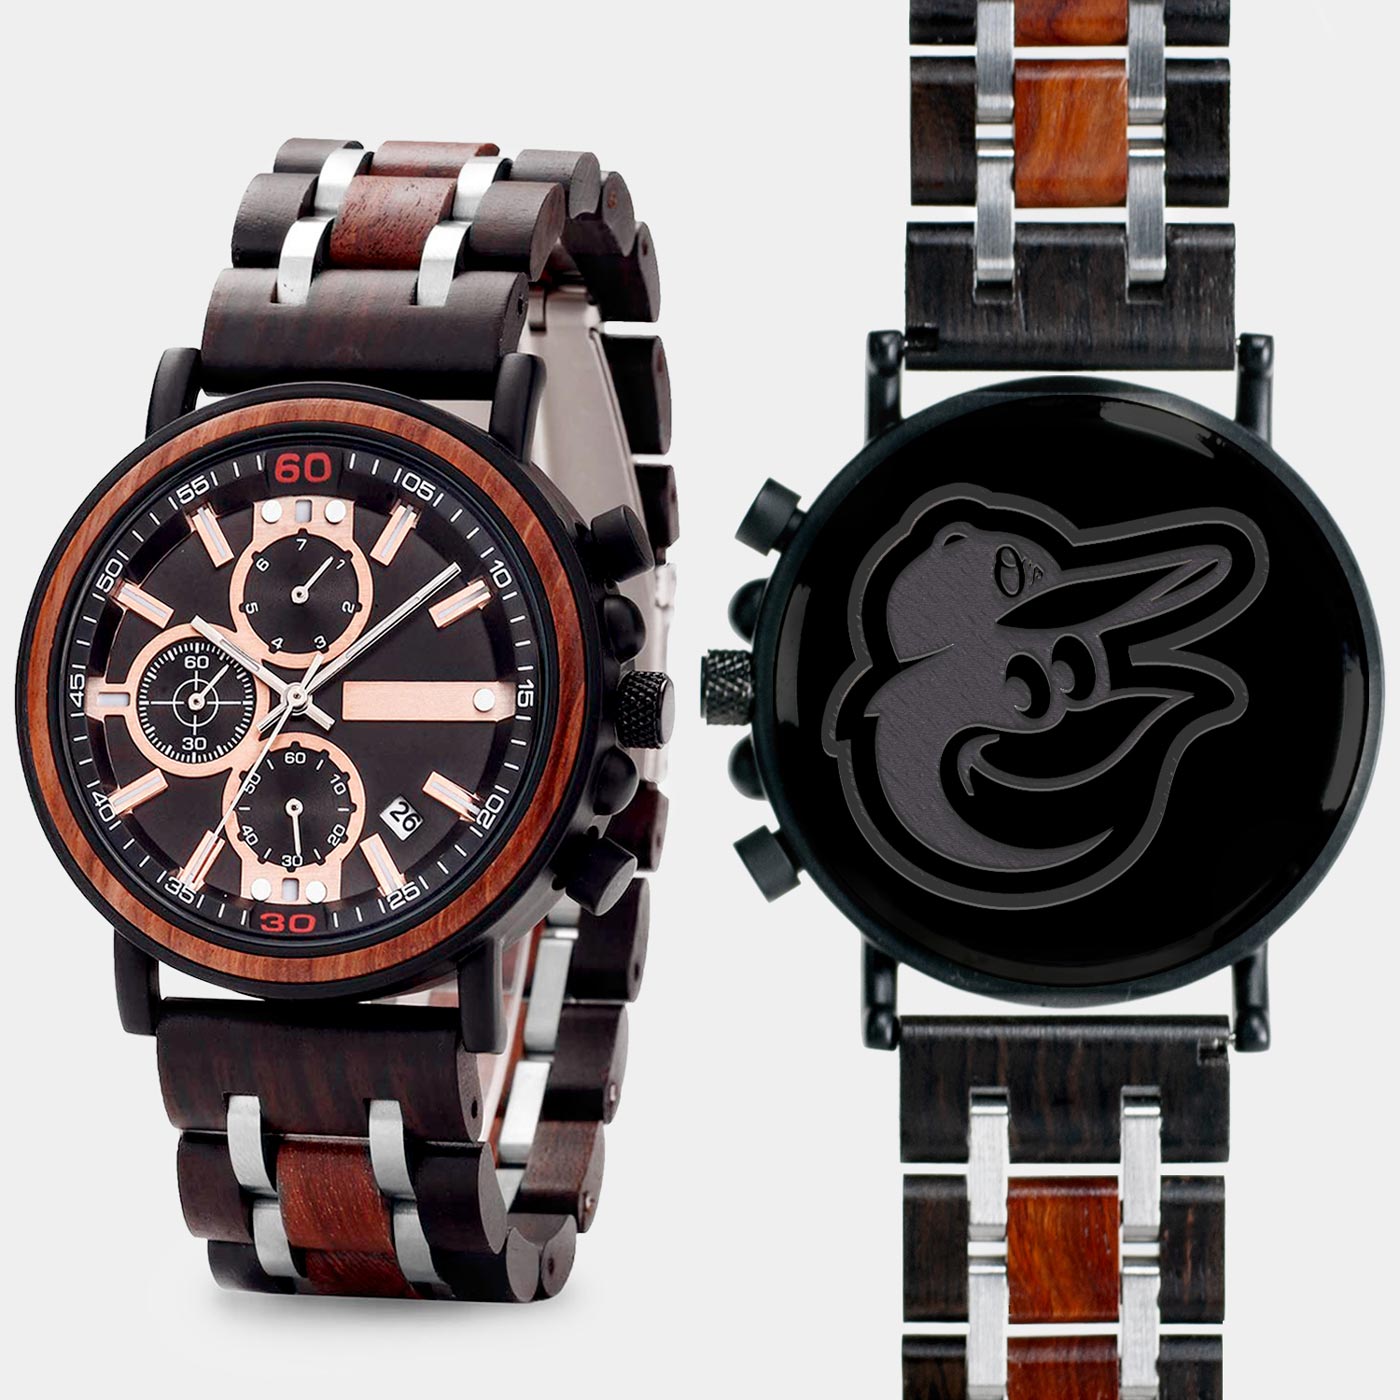 Baltimore Orioles Mens Wrist Watch  - Personalized Baltimore Orioles Mens Watches - Custom Gifts For Him, Birthday Gifts, Gift For Dad - Best 2022 Baltimore Orioles Christmas Gifts - Black 45mm MLB Wood Watch